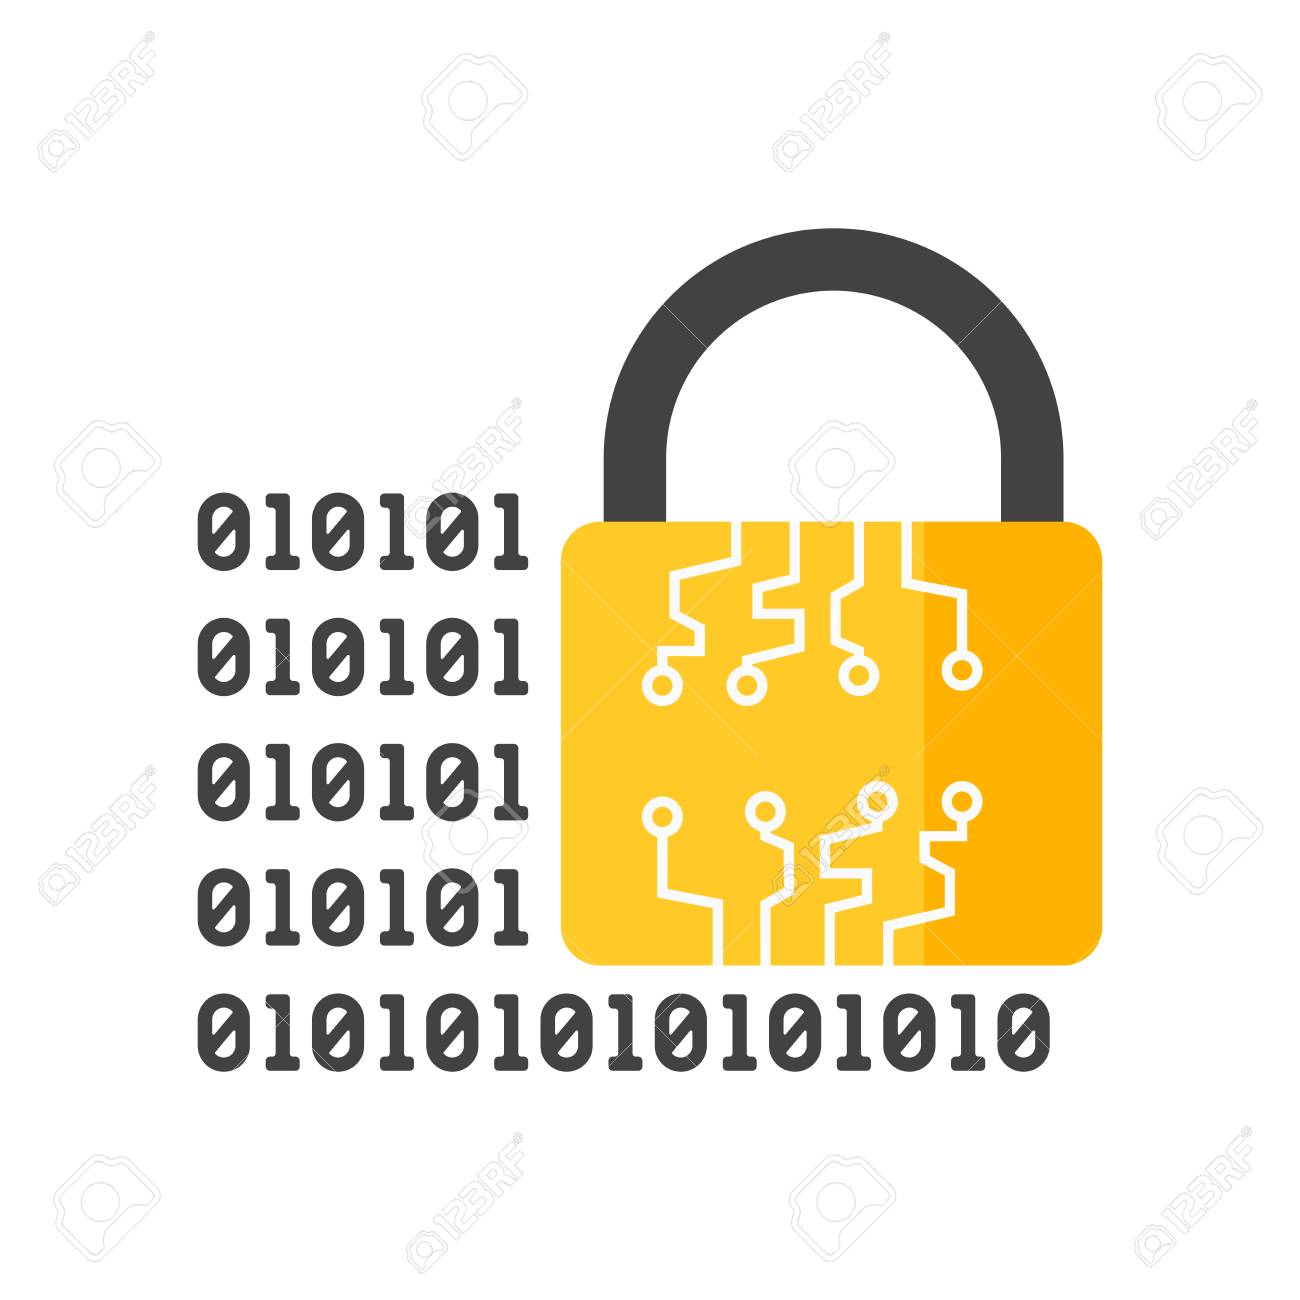 https://previews.123rf.com/images/vectorstockcompany/vectorstockcompany1808/vectorstockcompany180810781/107107436-encrypted-icon-vector-isolated-on-white-background-for-your-web-and-mobile-app-design-encrypted-logo.jpg